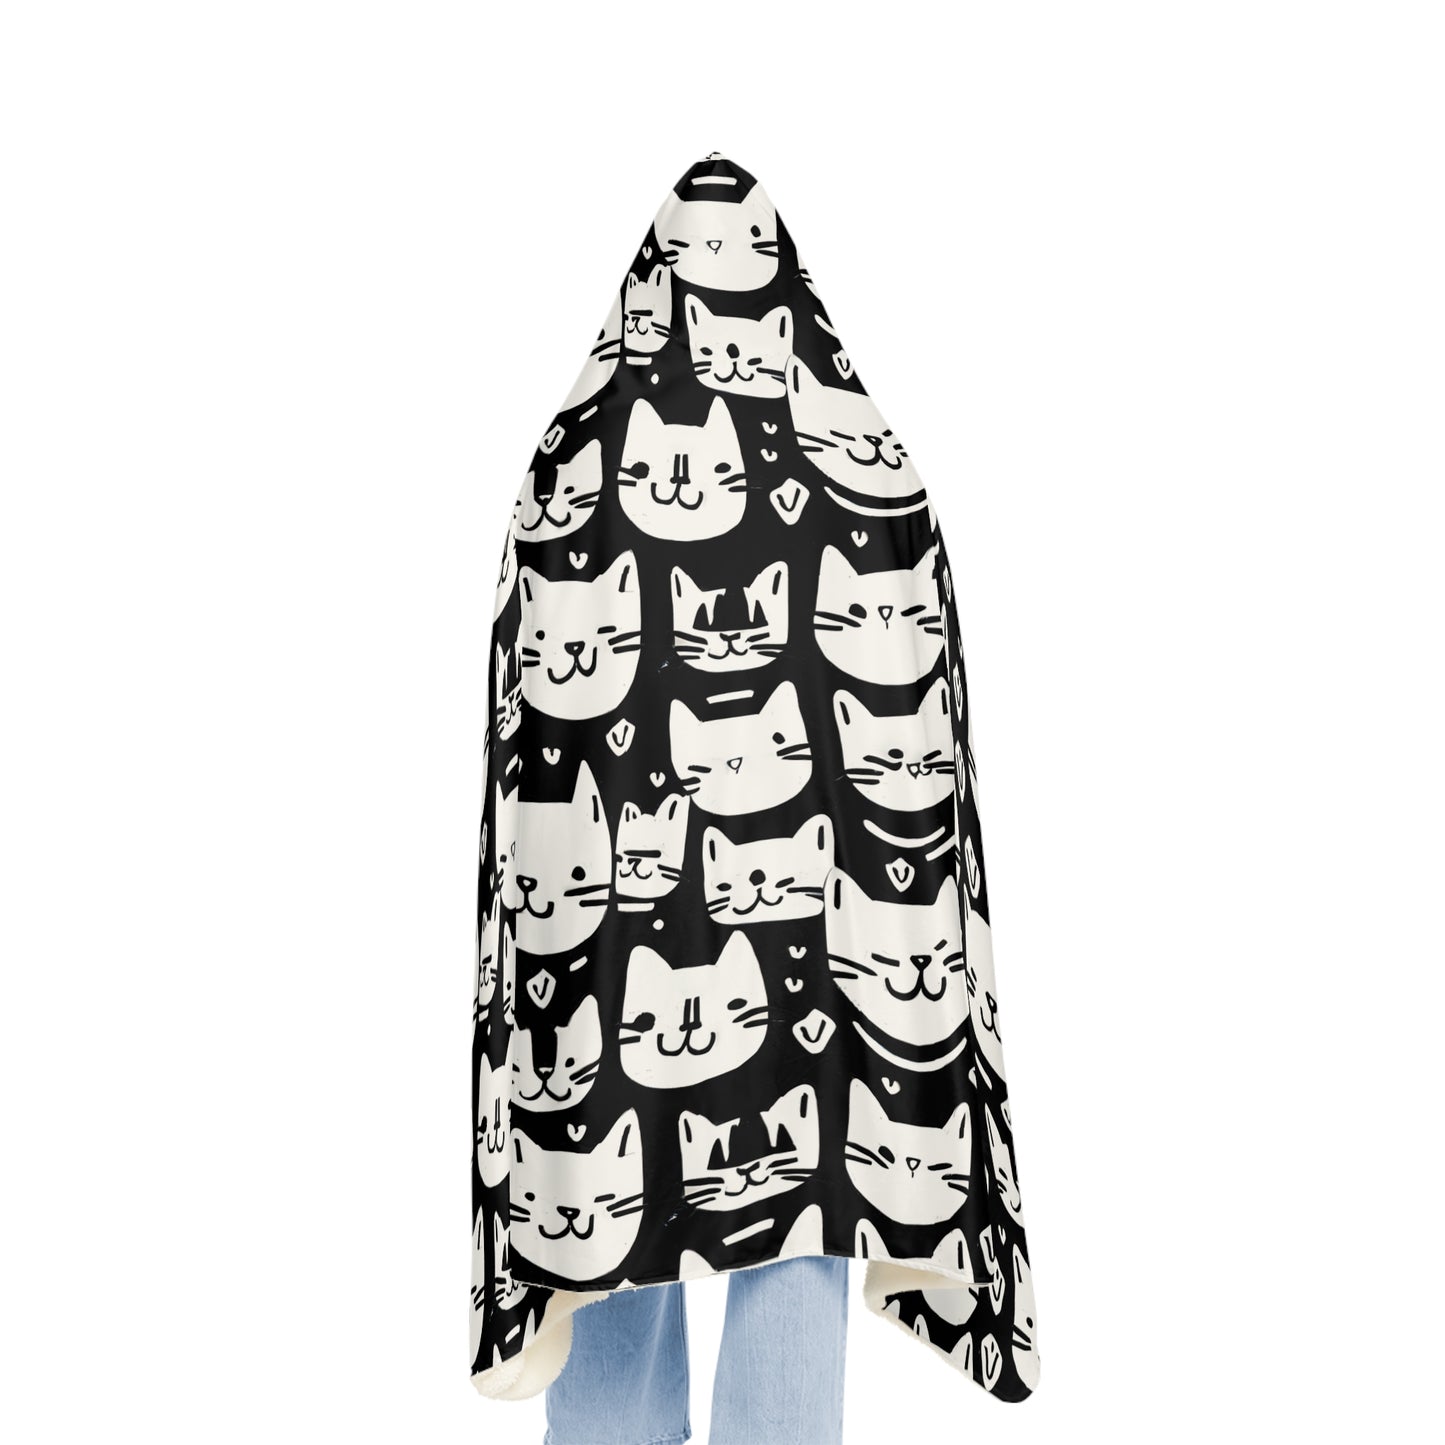 Black and White Cat Face Hooded Snuggle Blanket